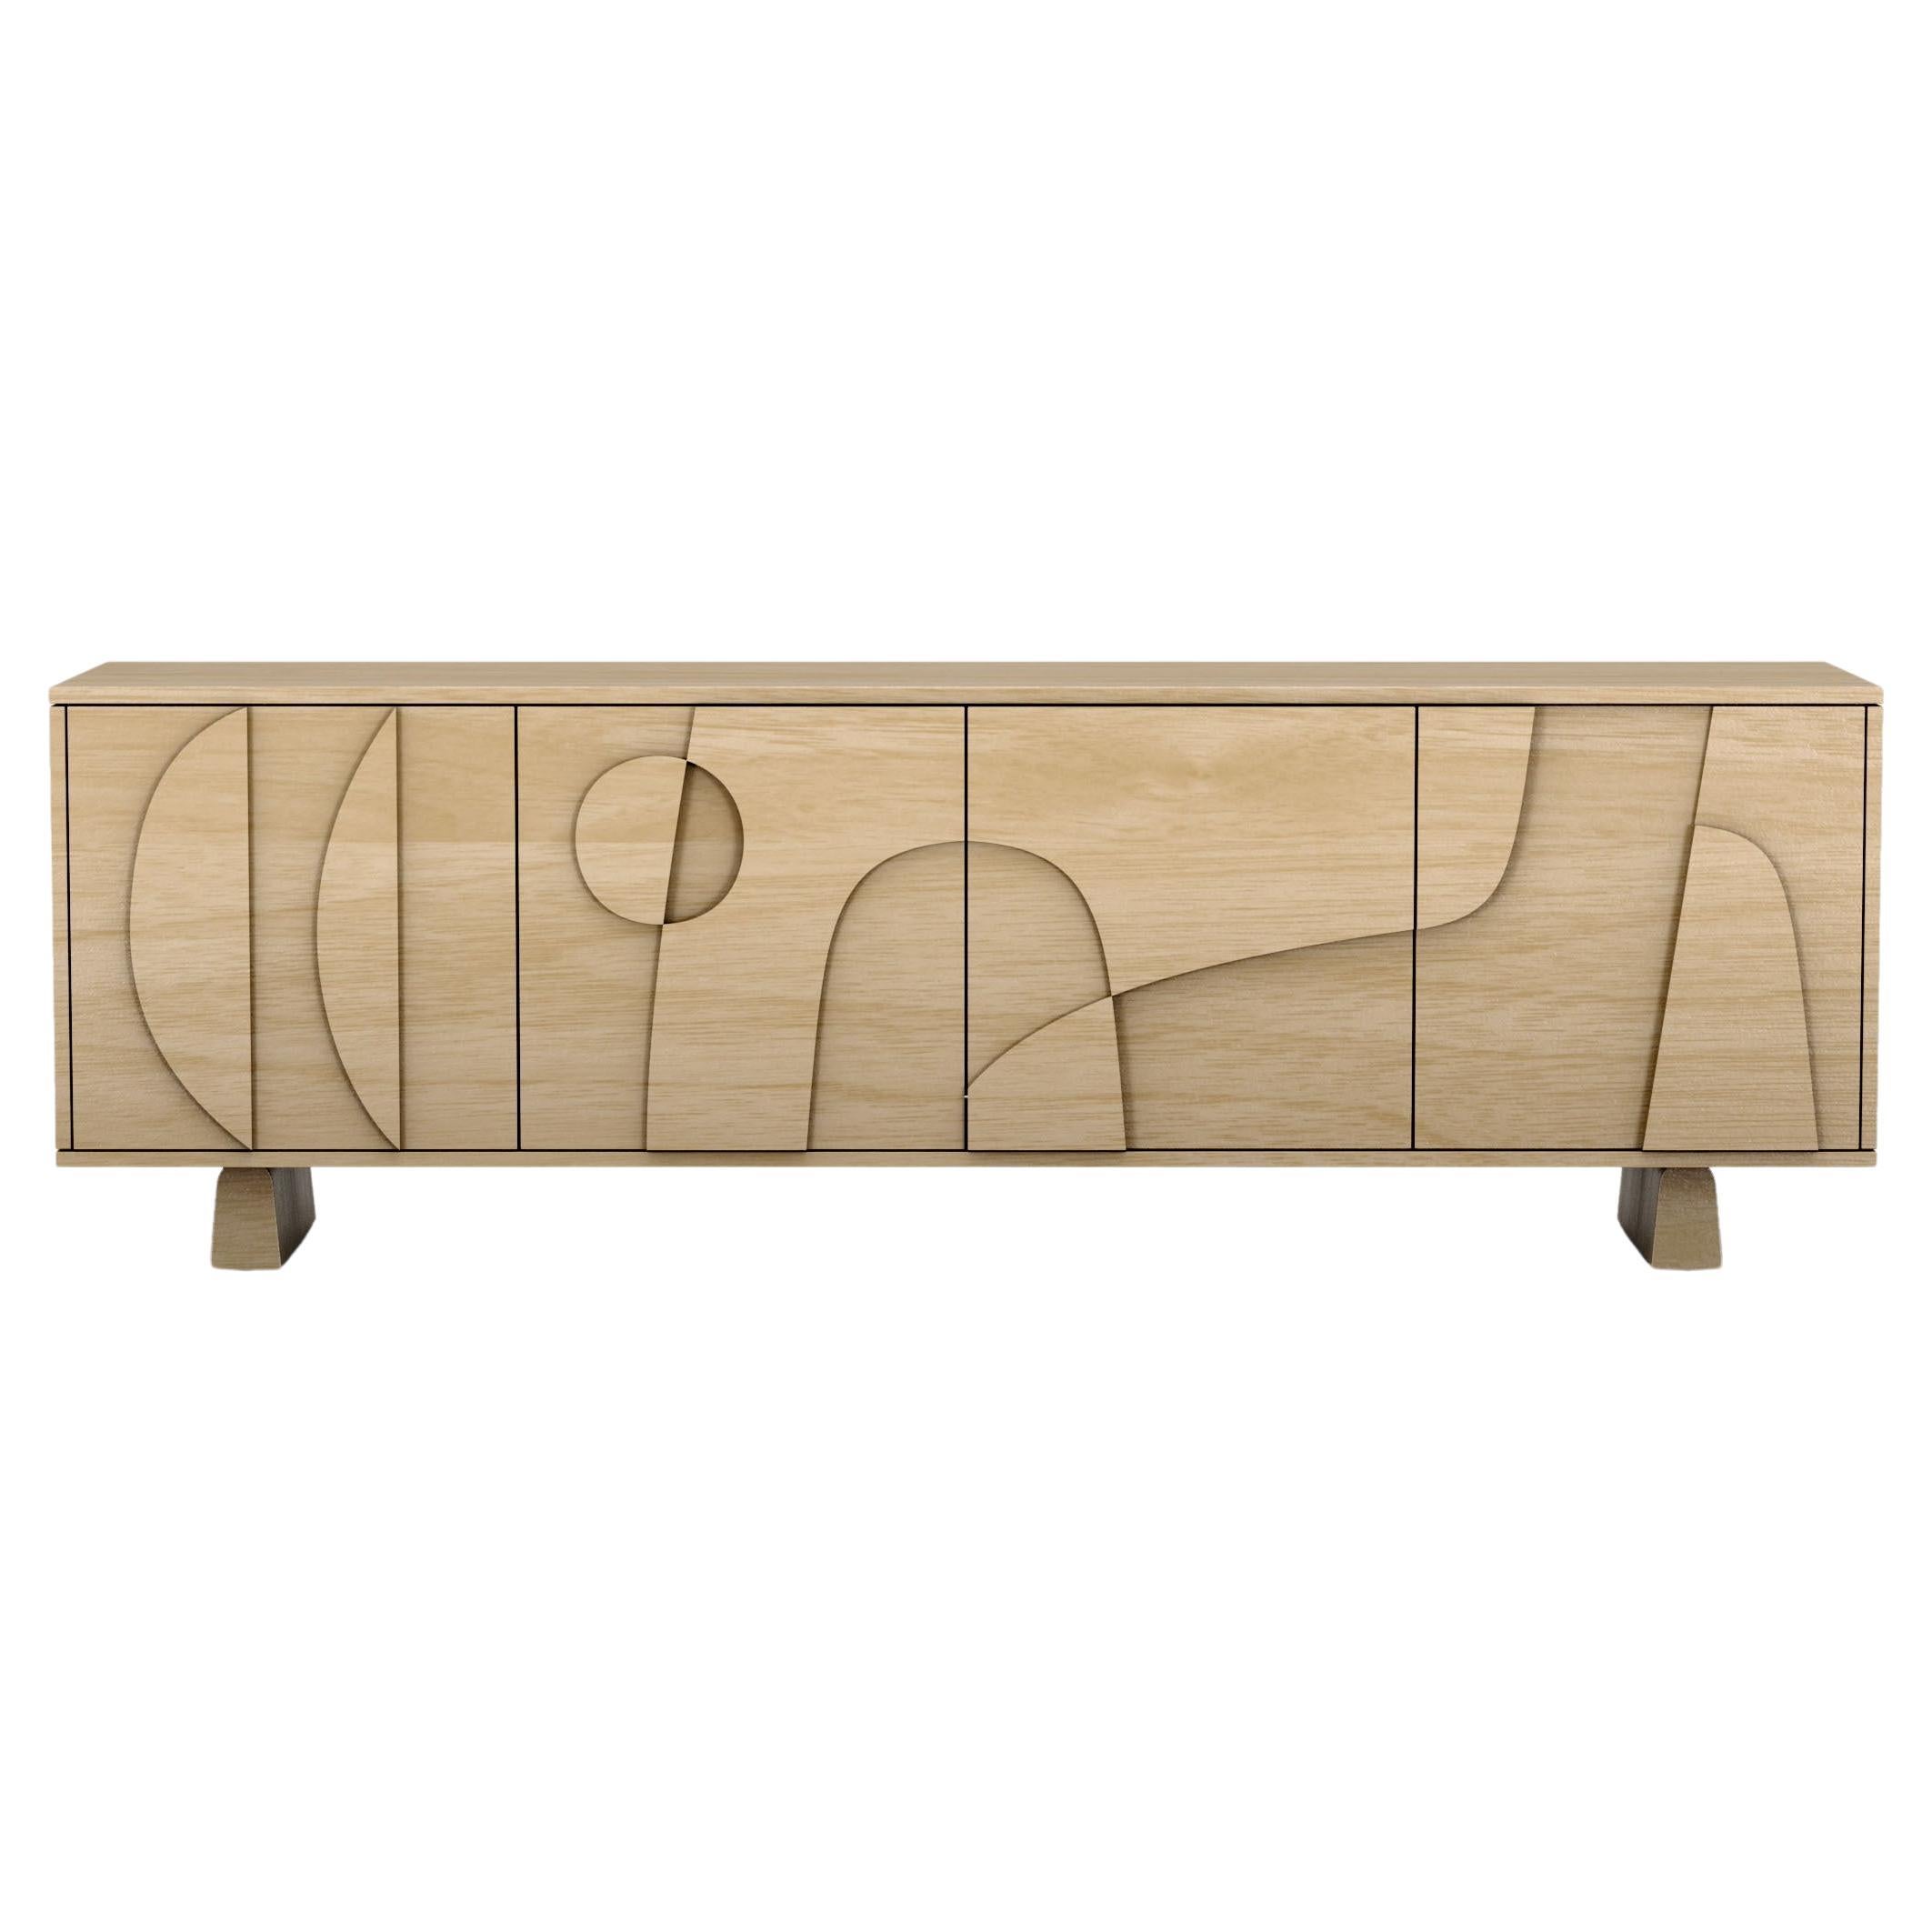 Contemporary 'Wynwood' 4 Sideboard by Man of Parts, Whiskey Oak, Short Legs For Sale 1